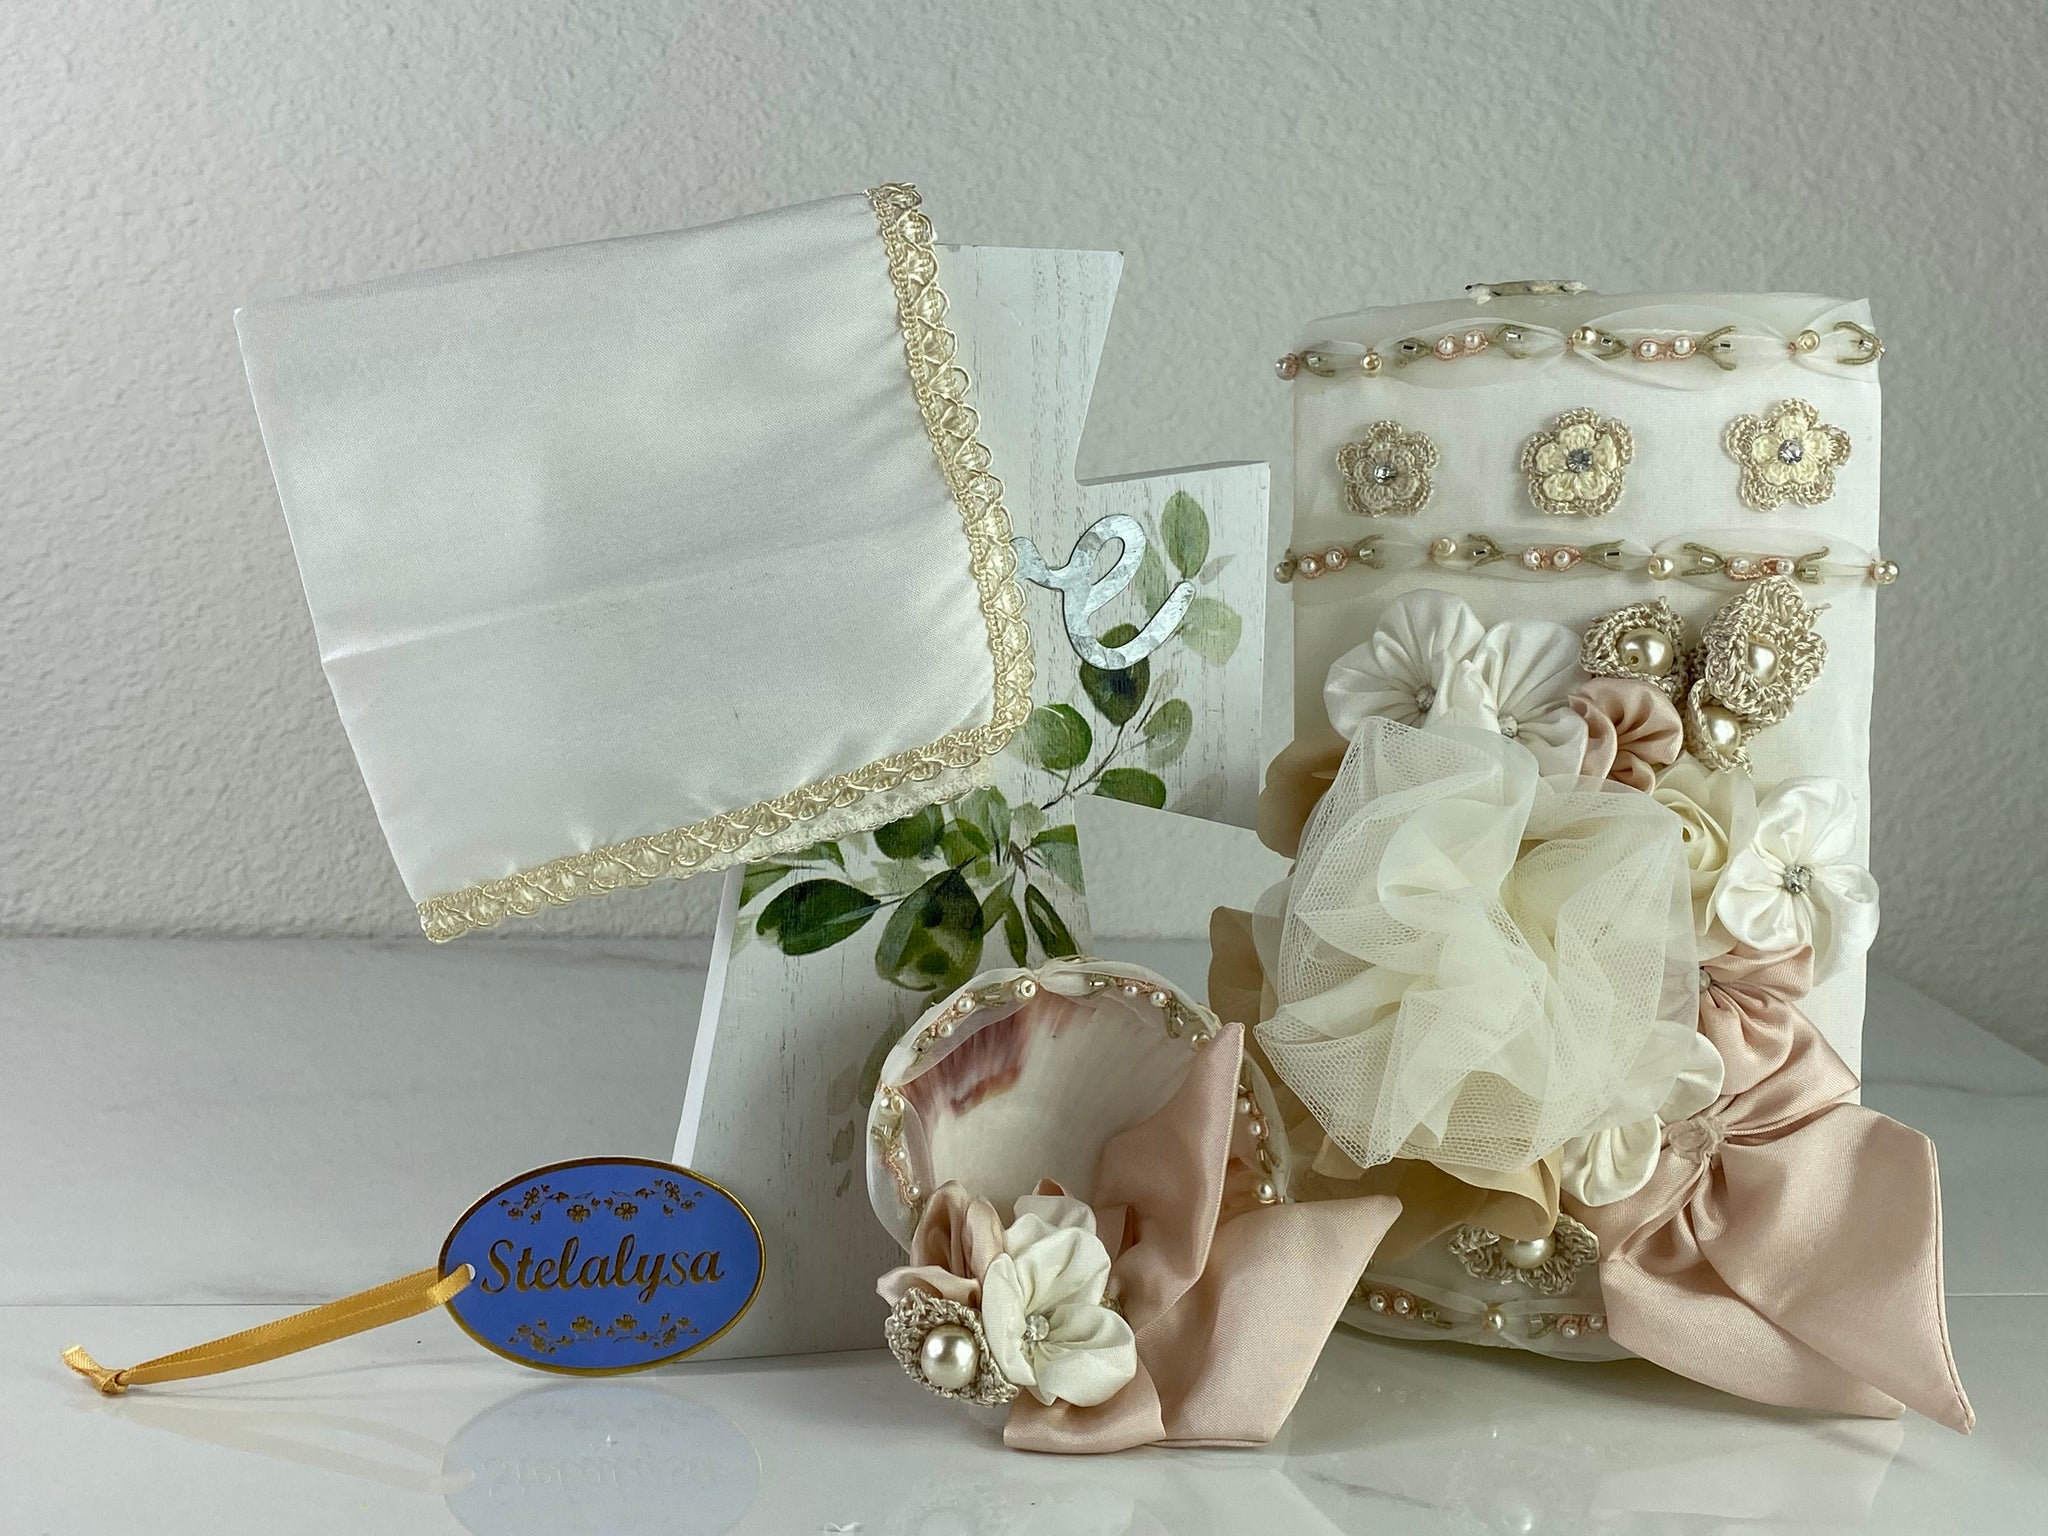 These one-of-a-kind Candle set is handmade and ivory in color.  This candle can also be use with a white baptism outfit because it has an array of light colors including white.   It is uniquely decorated with crochet and satin flowers, ribbon, pearls, crystals, and beads making it a gorgeous keepsake.   This candle is oval in shape.    To match, the Shell is put together piece by piece to compliment the Candle and Handkerchief.  The Handkerchief is made of satin and embroidered lace